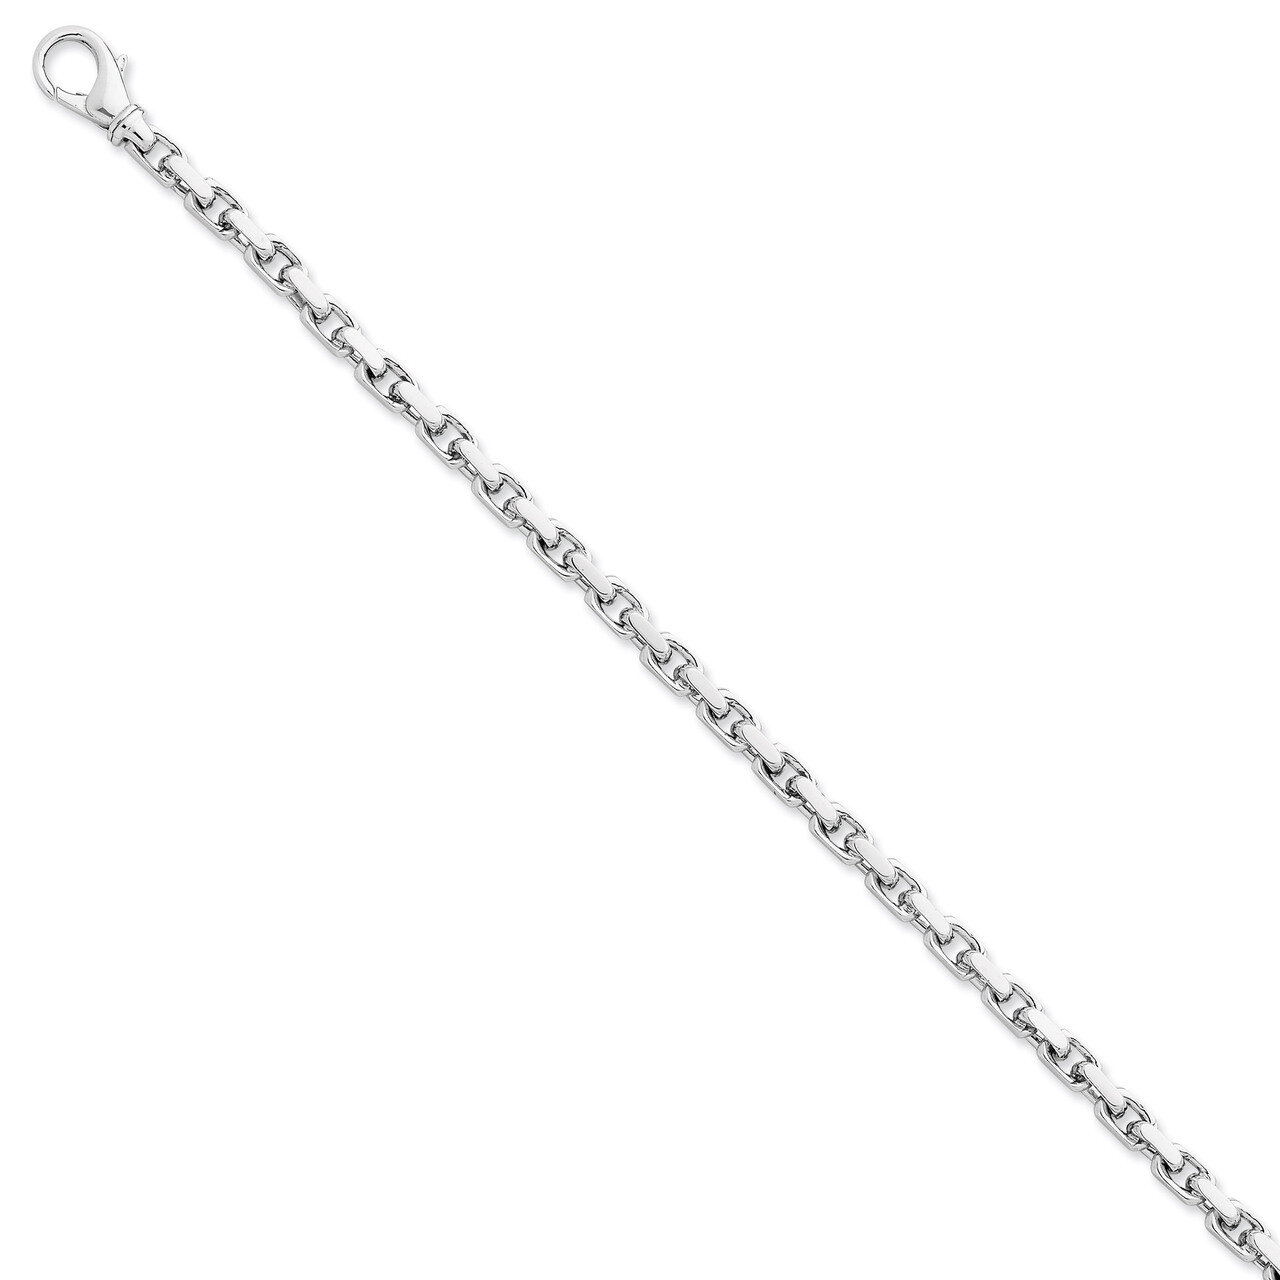 4.5mm Hand-Polished Link Chain 7 Inch 14k White Gold WLK302-7